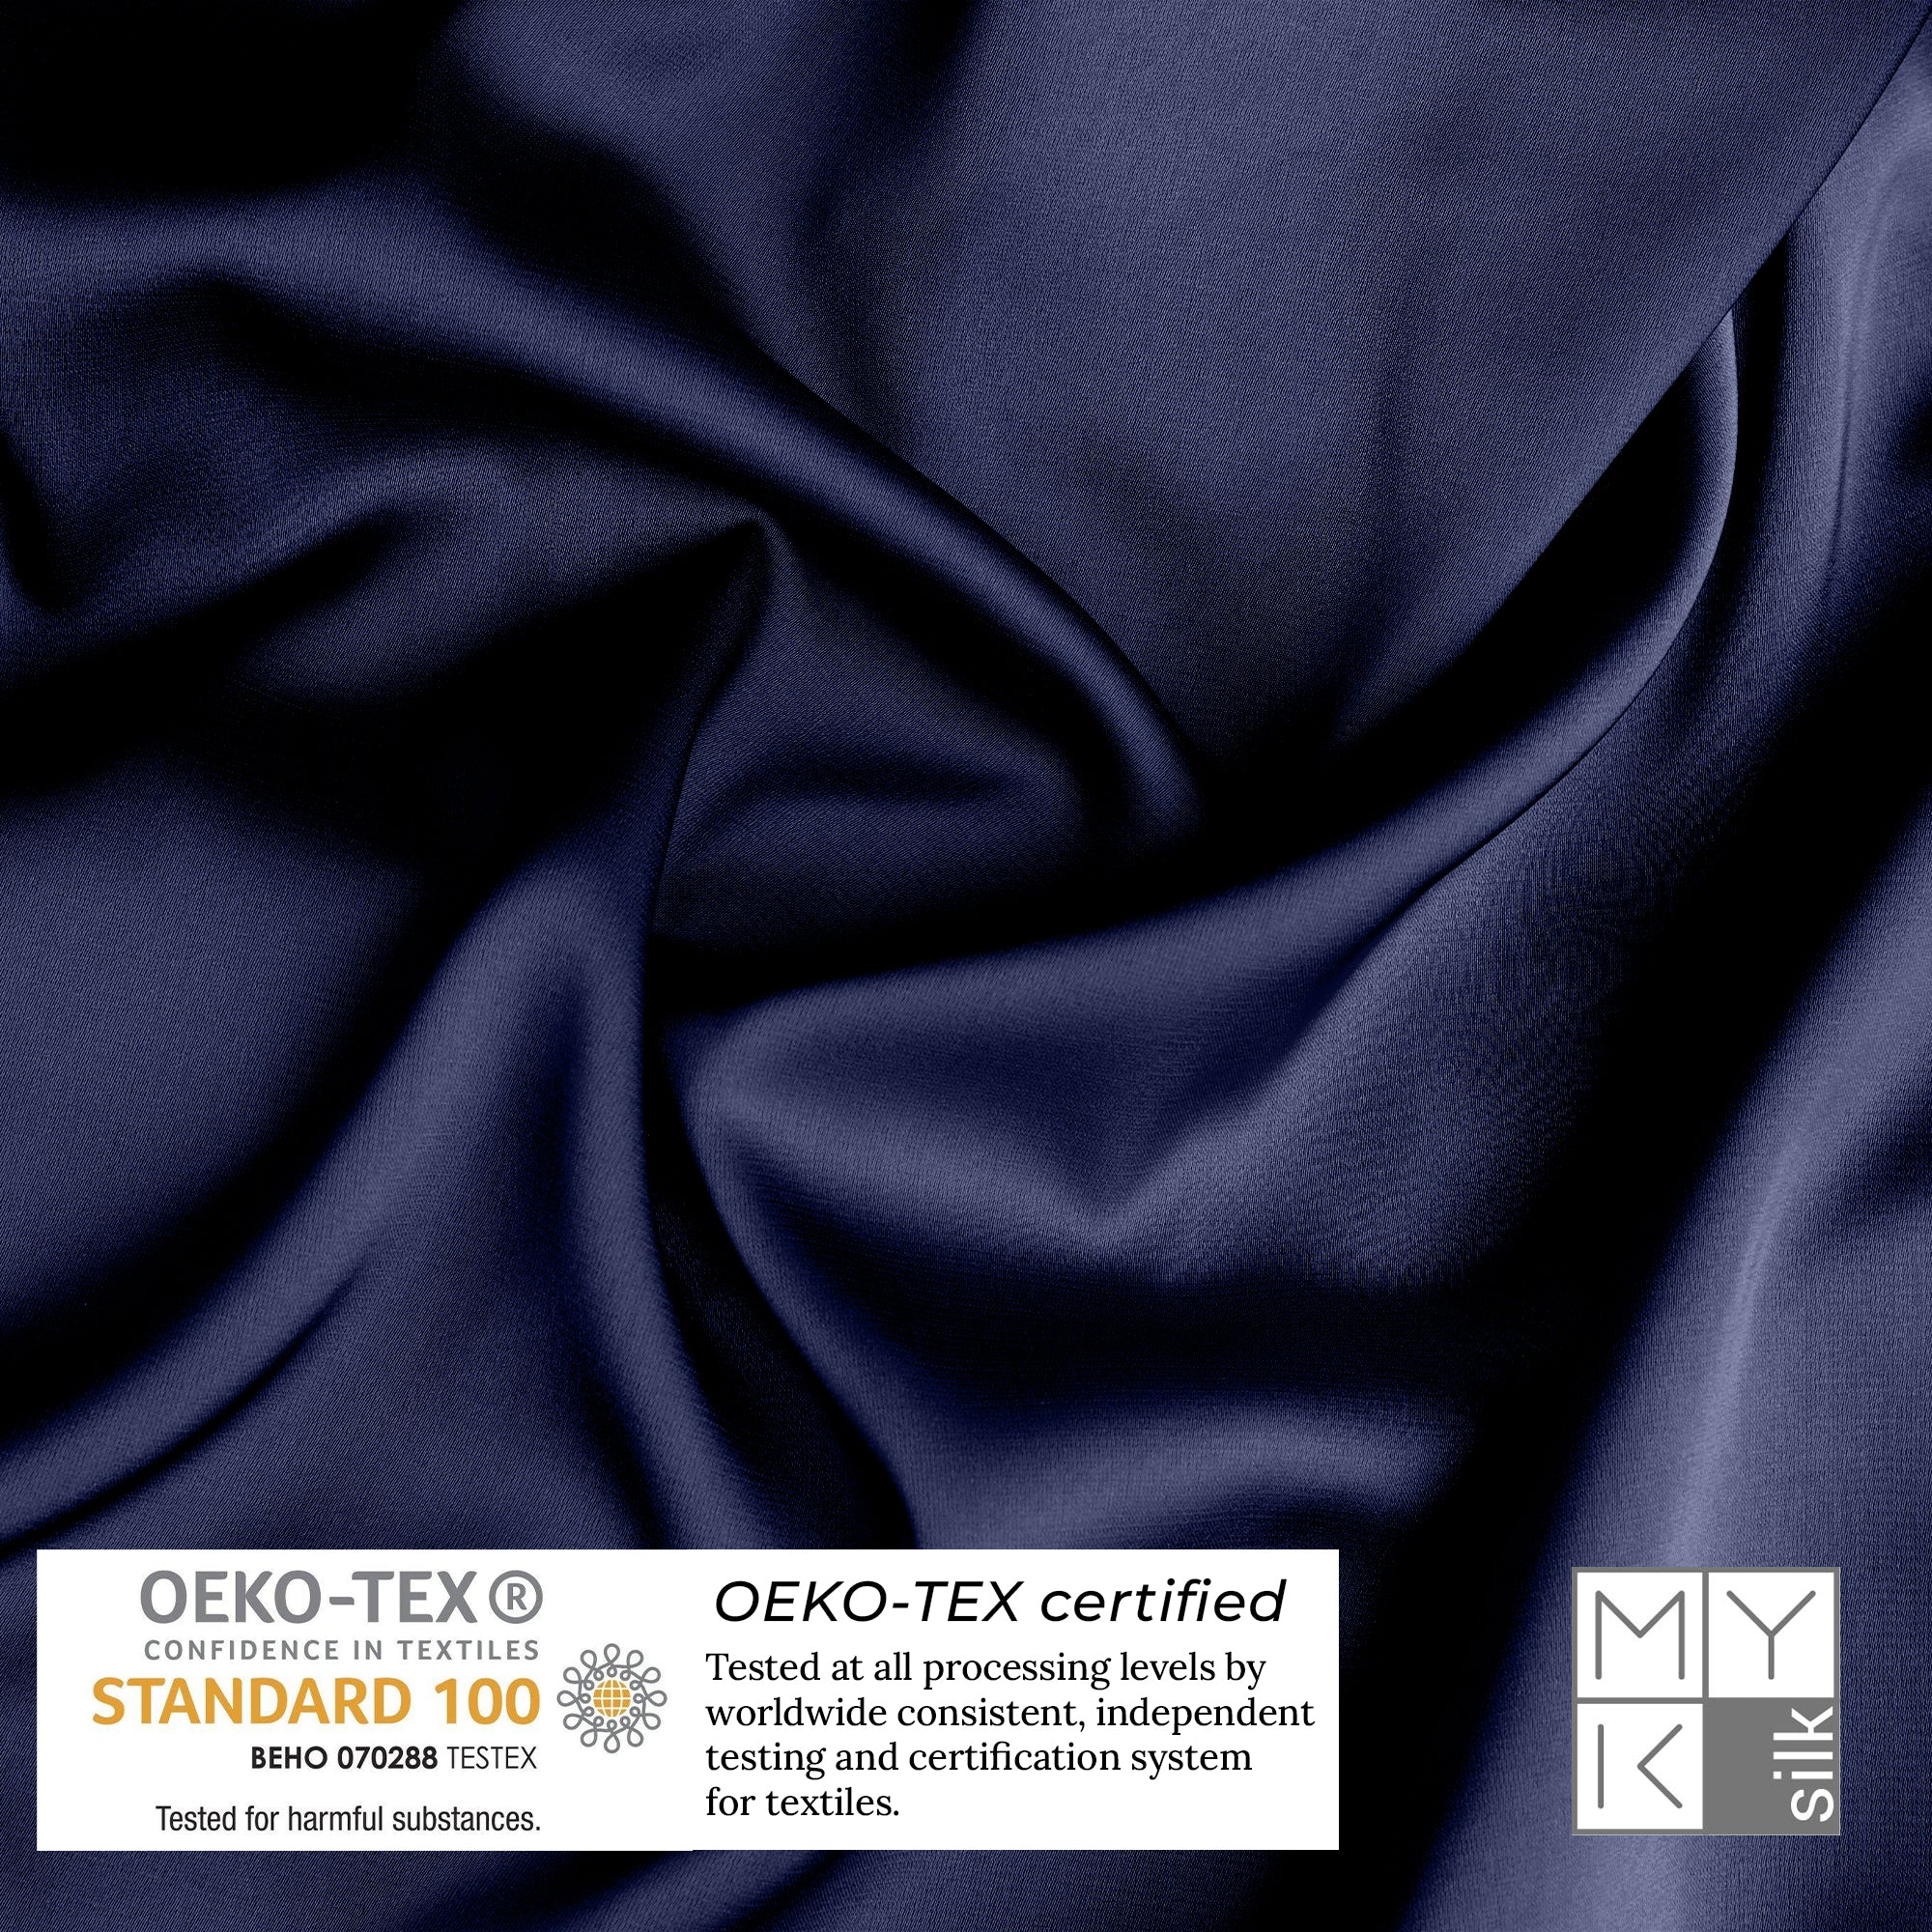 Products Luxury Mulberry Silk Pillowcase with Cotton Underside (25 momme) - MYK Silk #color_navy blue